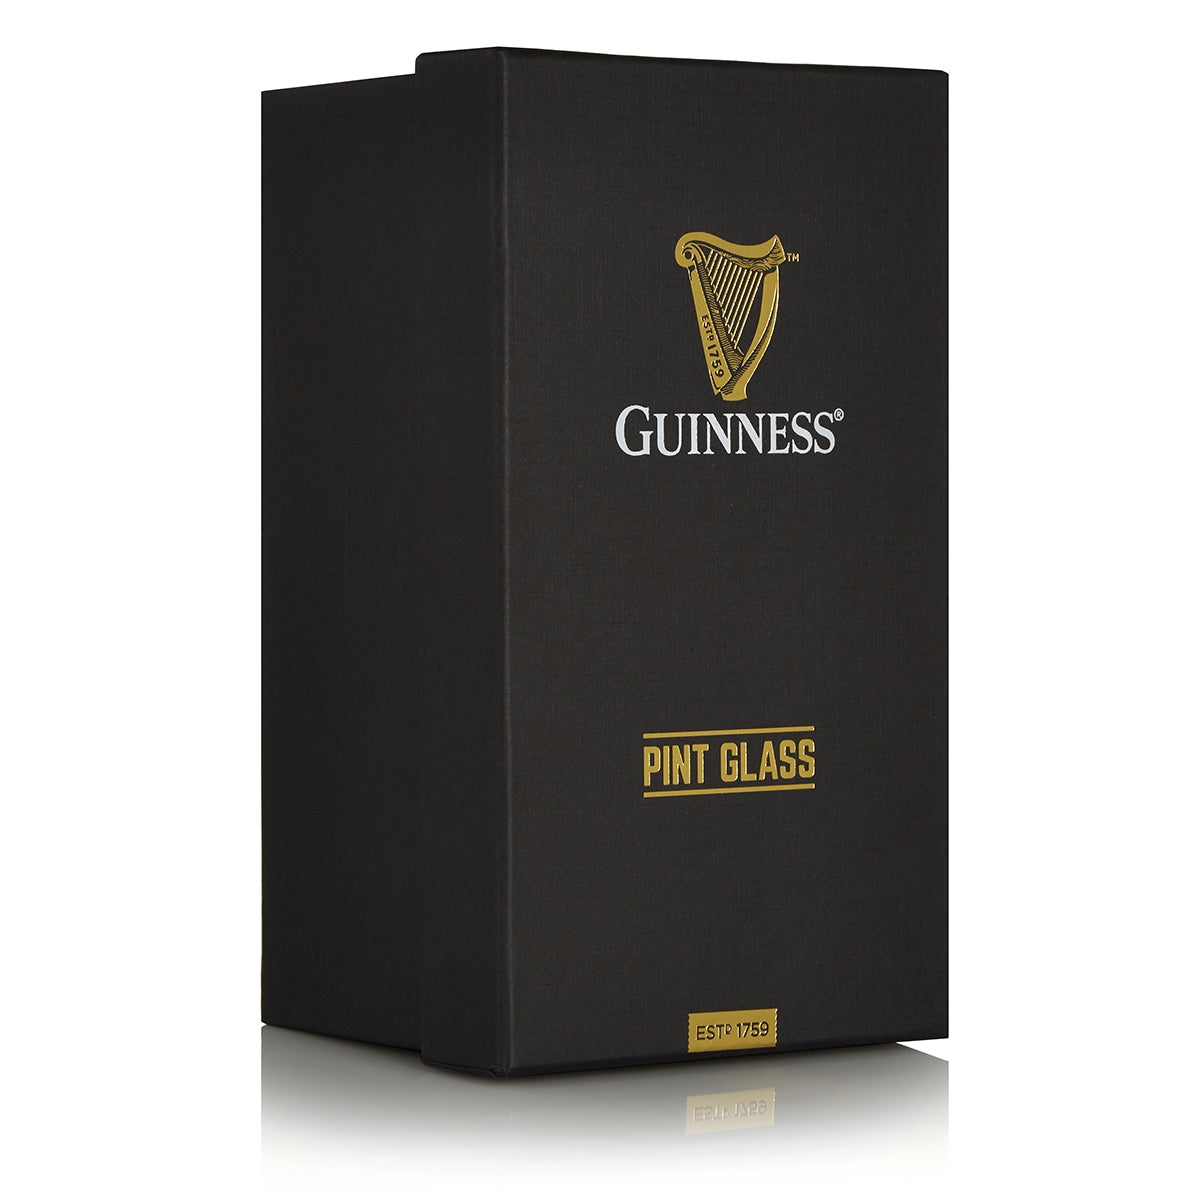 Guinness Glassware Collection – season-mills-gifts